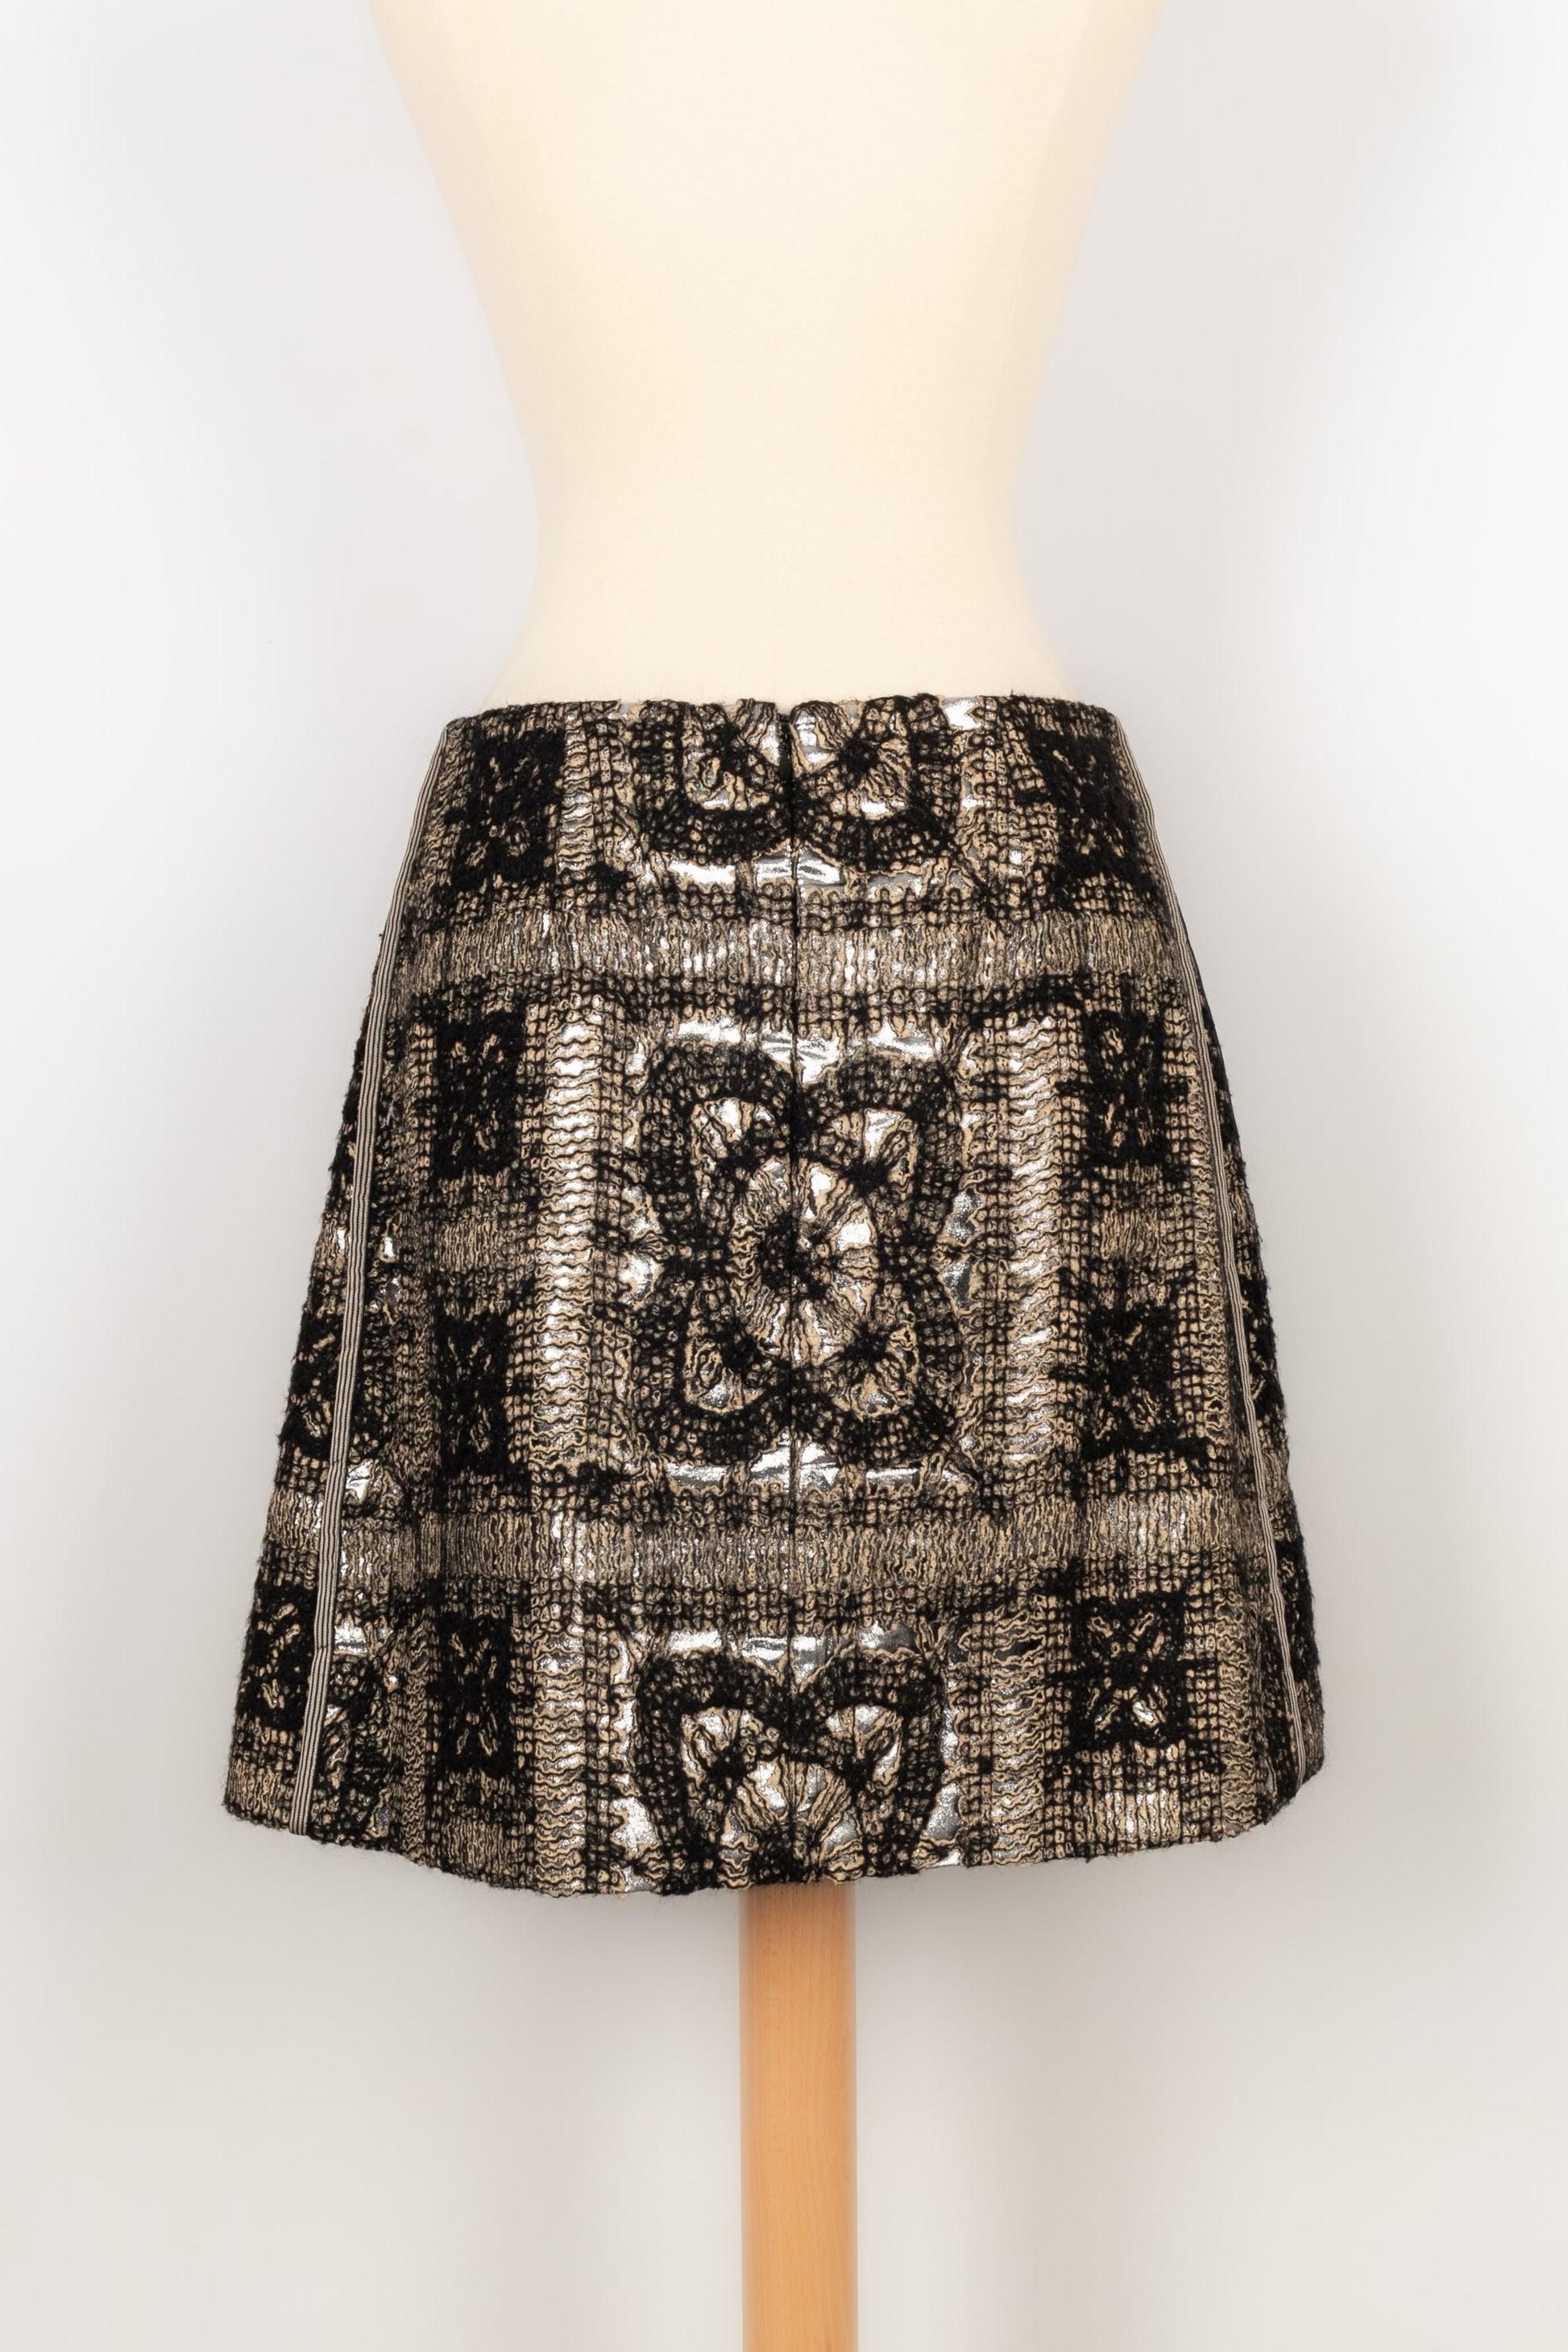 Women's Christian Lacroix Blended Cotton and Mohair Wool Skirt, 2008 For Sale